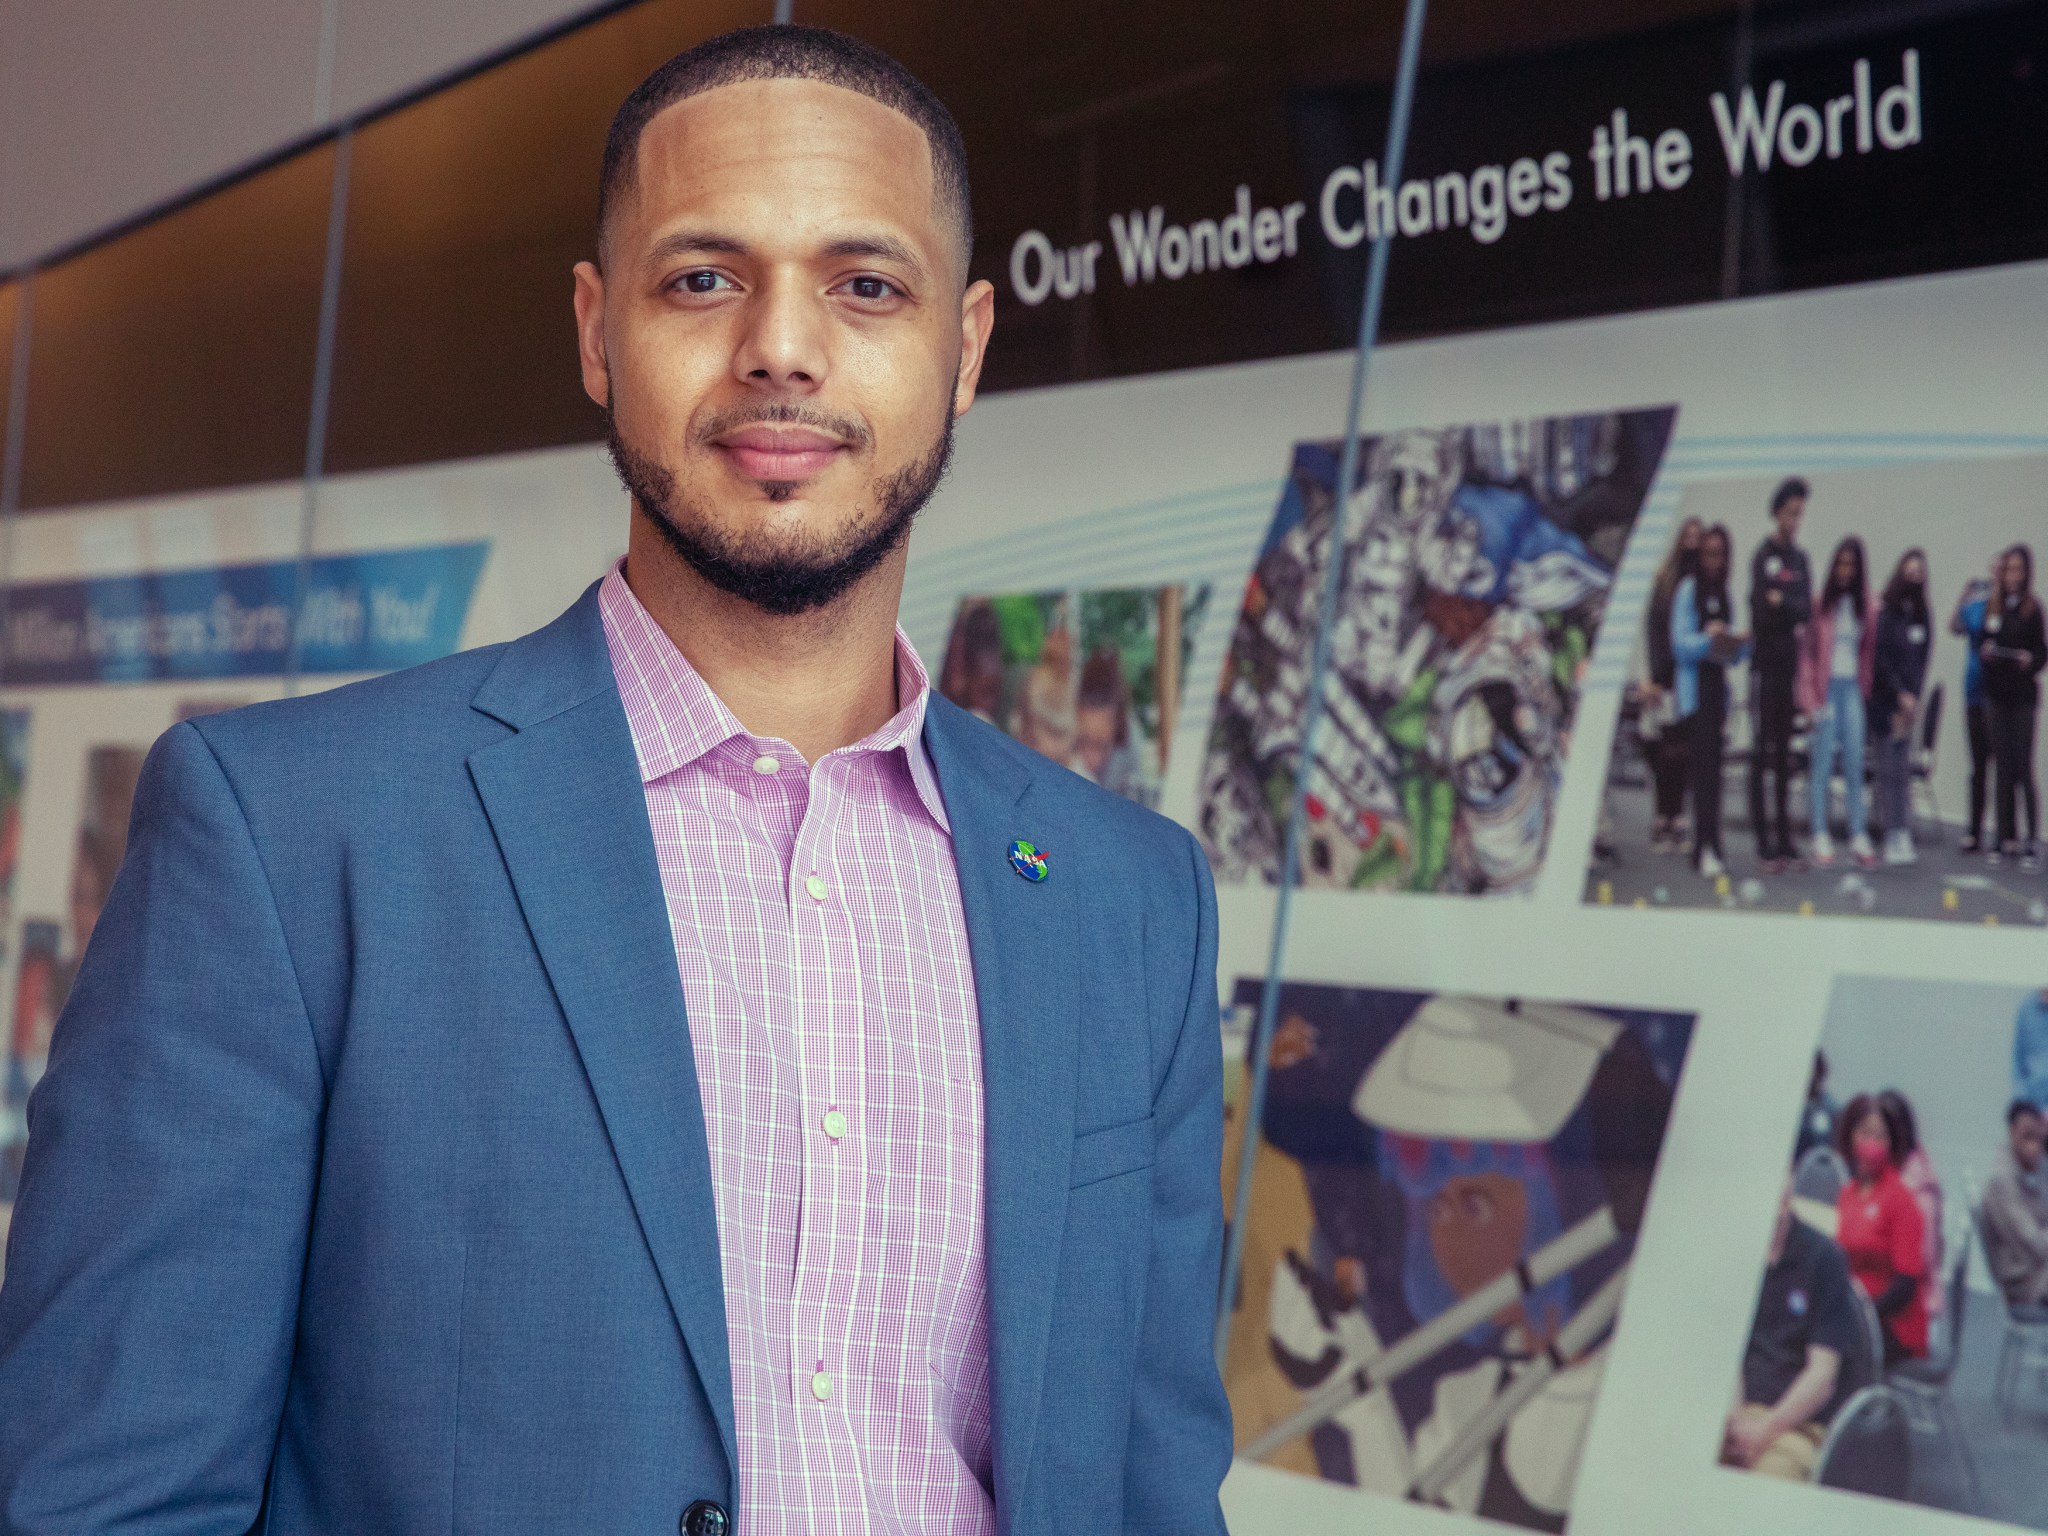 This is a photo of Matthew Hayes, a DEIA Project Analyst with NASA’s Langley Research Center. Matthew is wearing a blue suit and is standing in front of a mural featuring photos of Langley employees. There is text above the photo collage that reads "Our Wonder Changes the World."